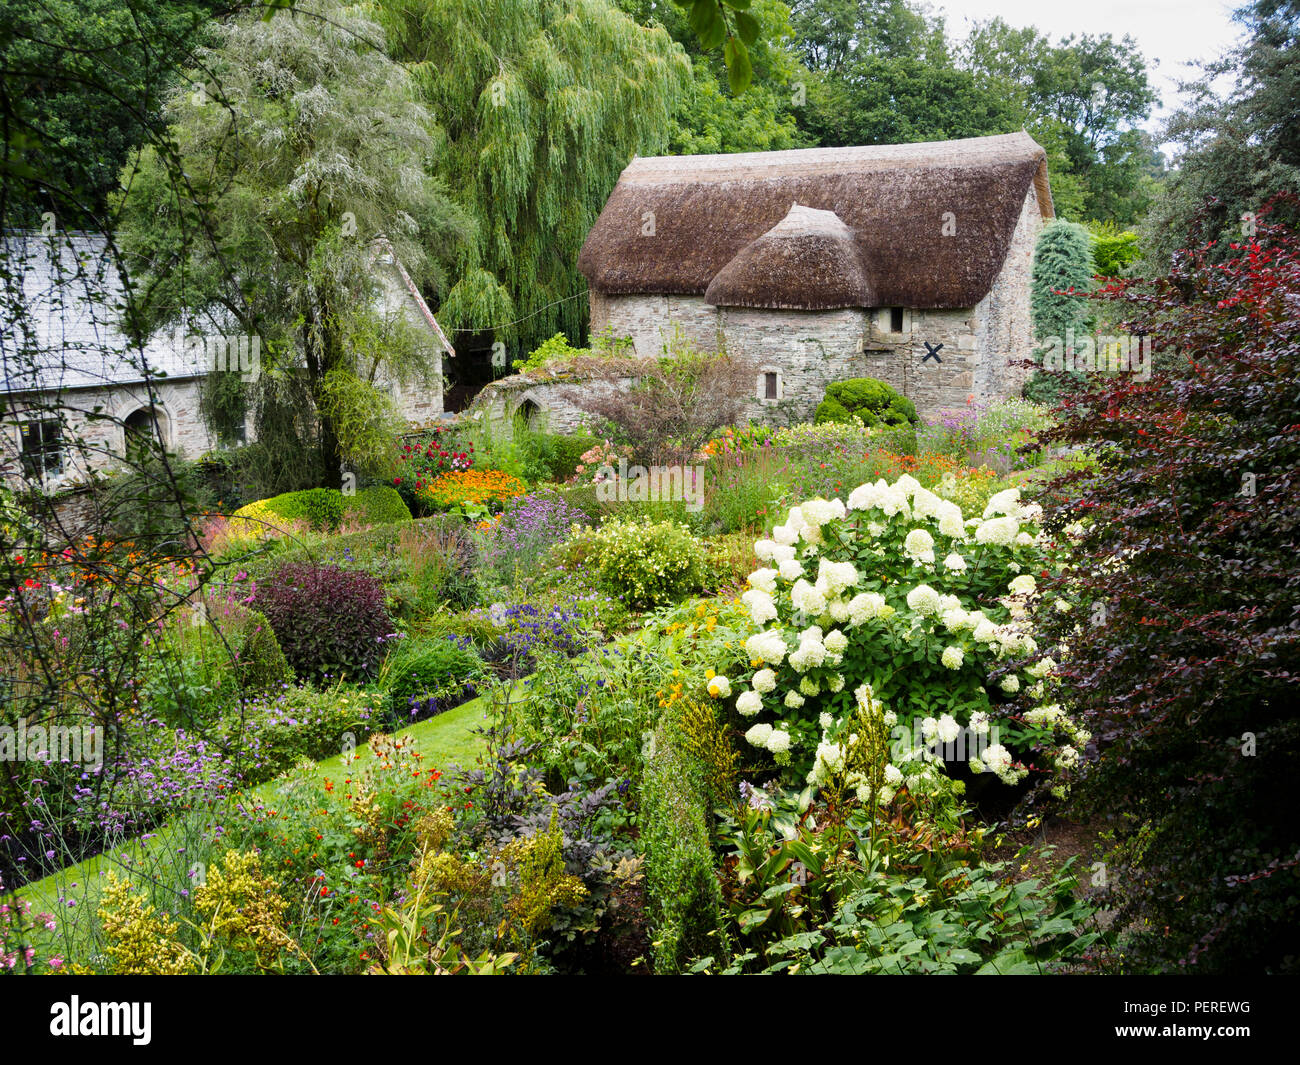 August view over the lower terrace of the walled garden at The Garden House, Buckland Monachorum, Devon, UK Stock Photo